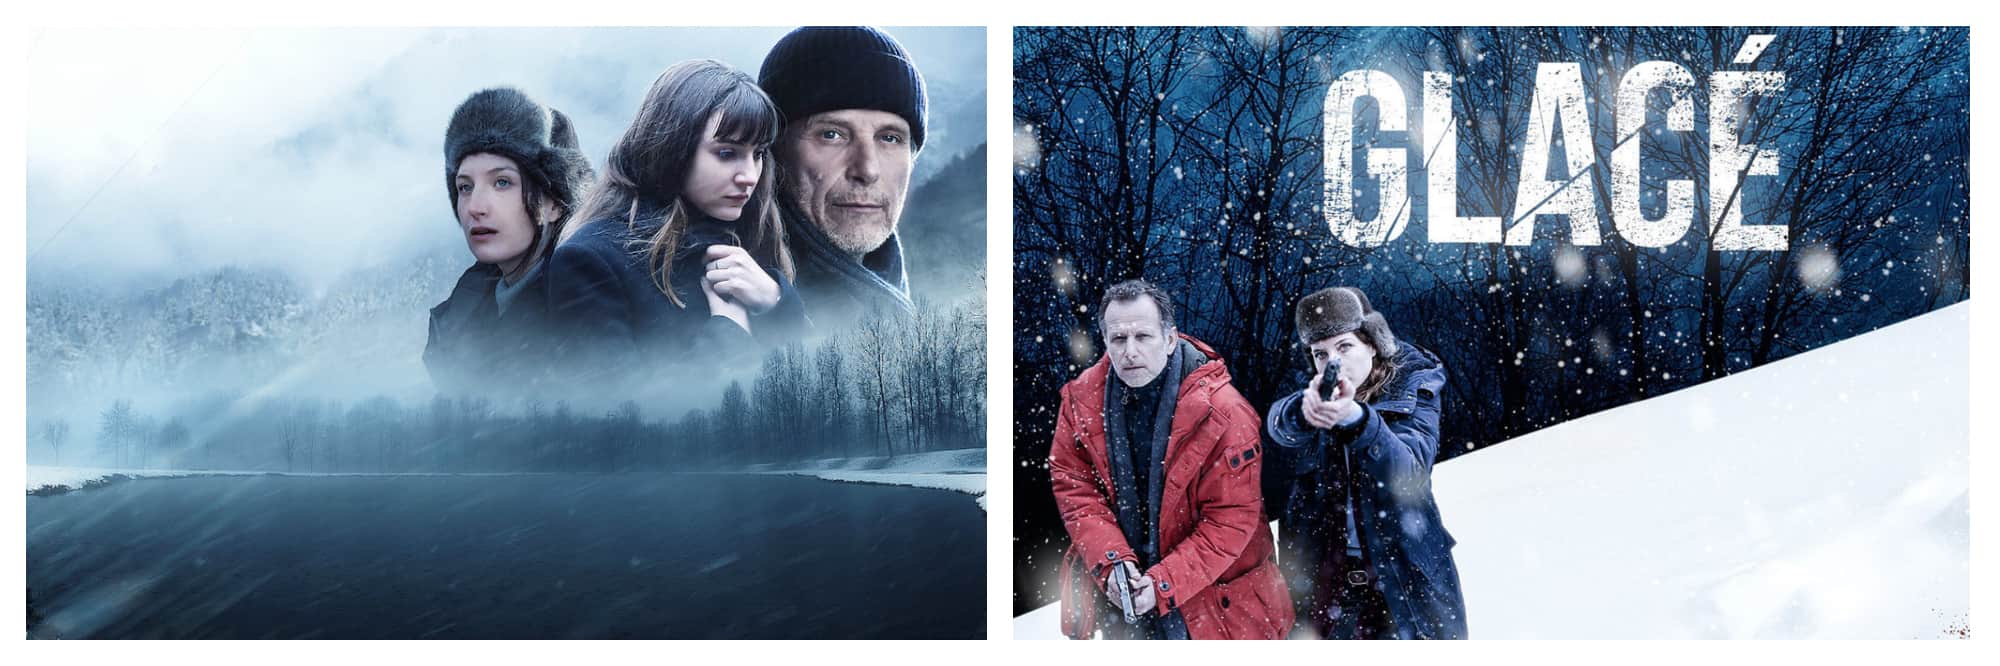 Left, cast of Steven Lasry against backdrop of misty mountains. Right, cast of The Frozen Dead Netflox series with one holding up a gun against a backdrop of snow.